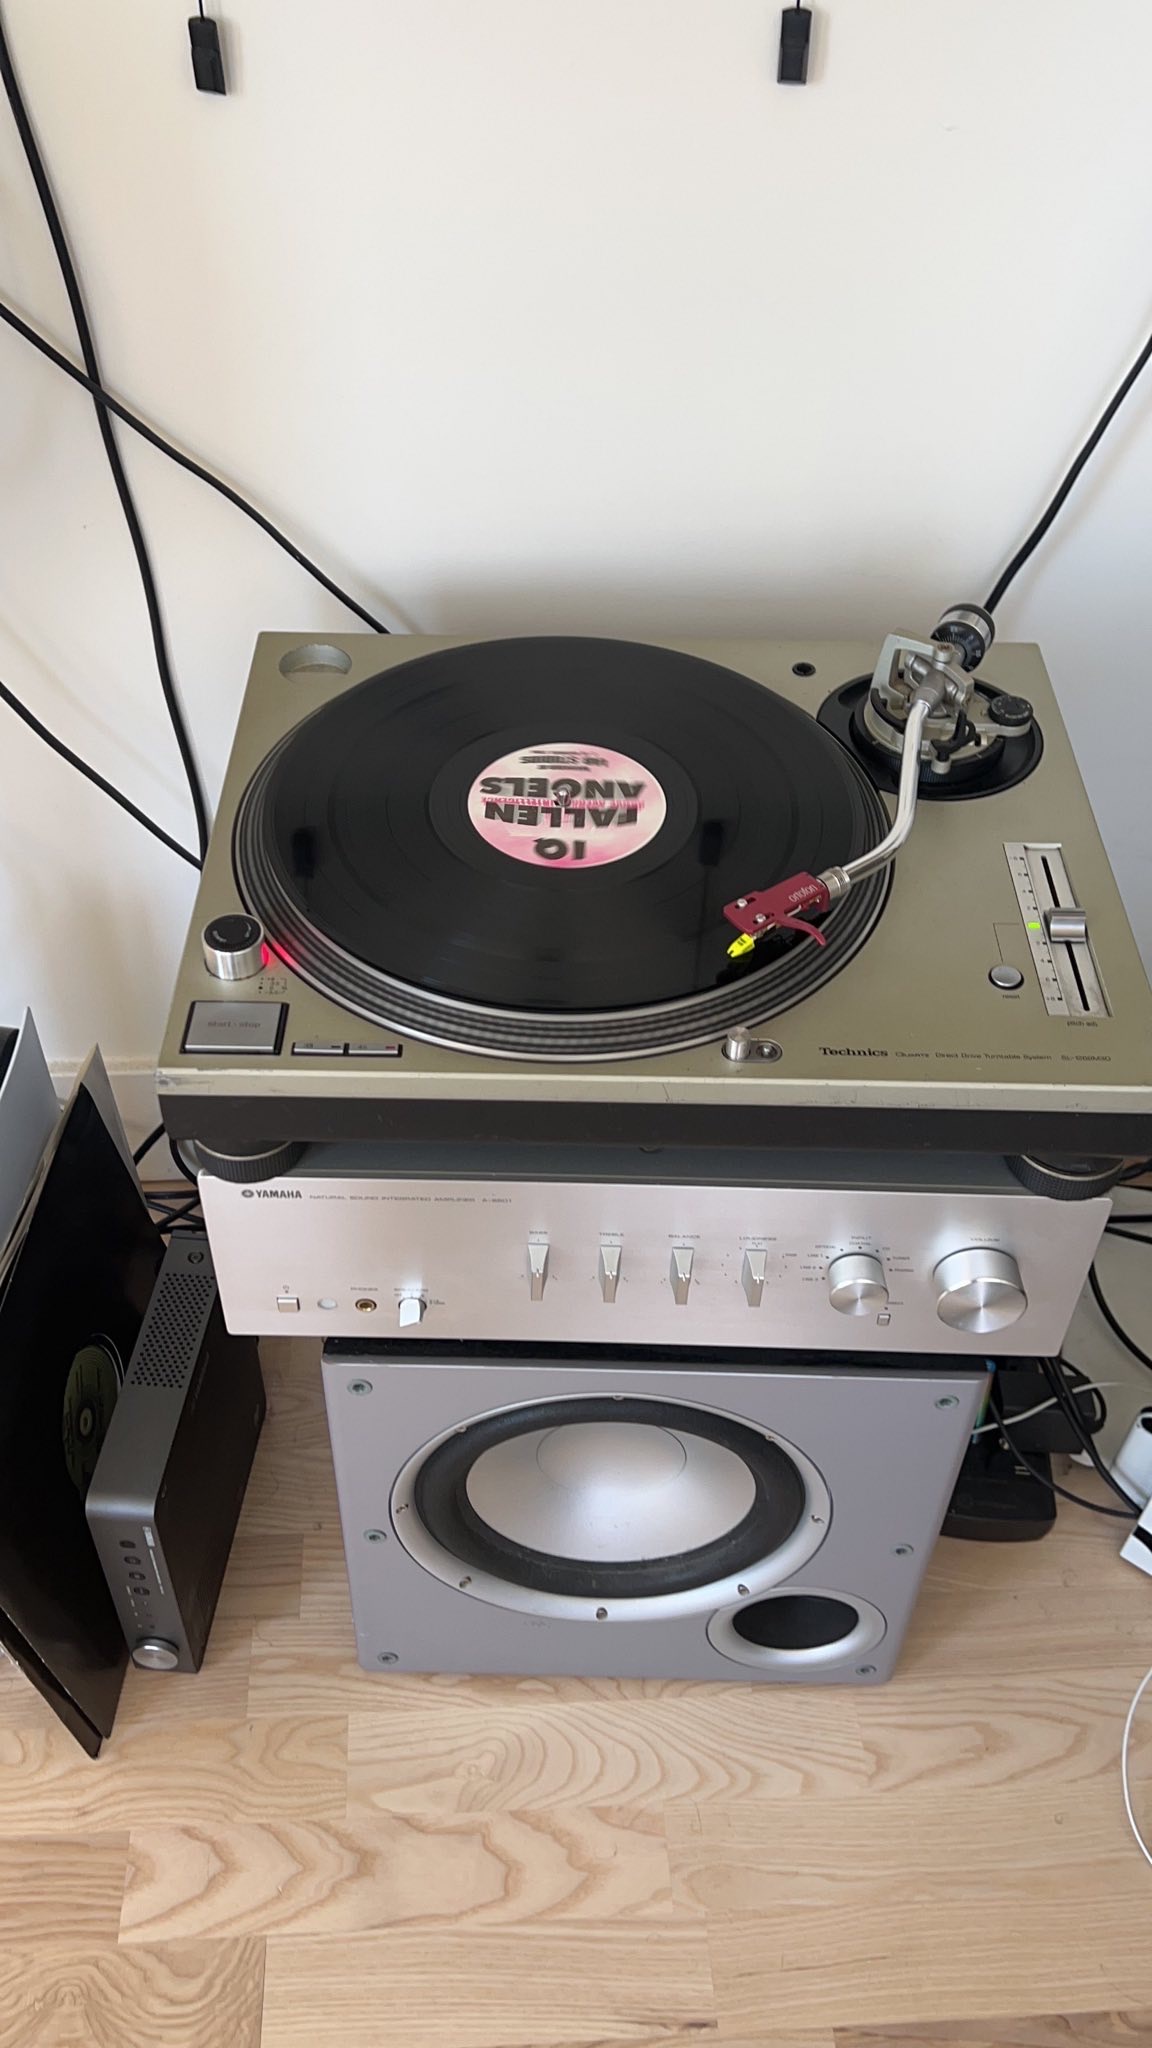 My 'Fallen Angels - Hello Lover EP' record on top of the afromentioned turntable and amplifier